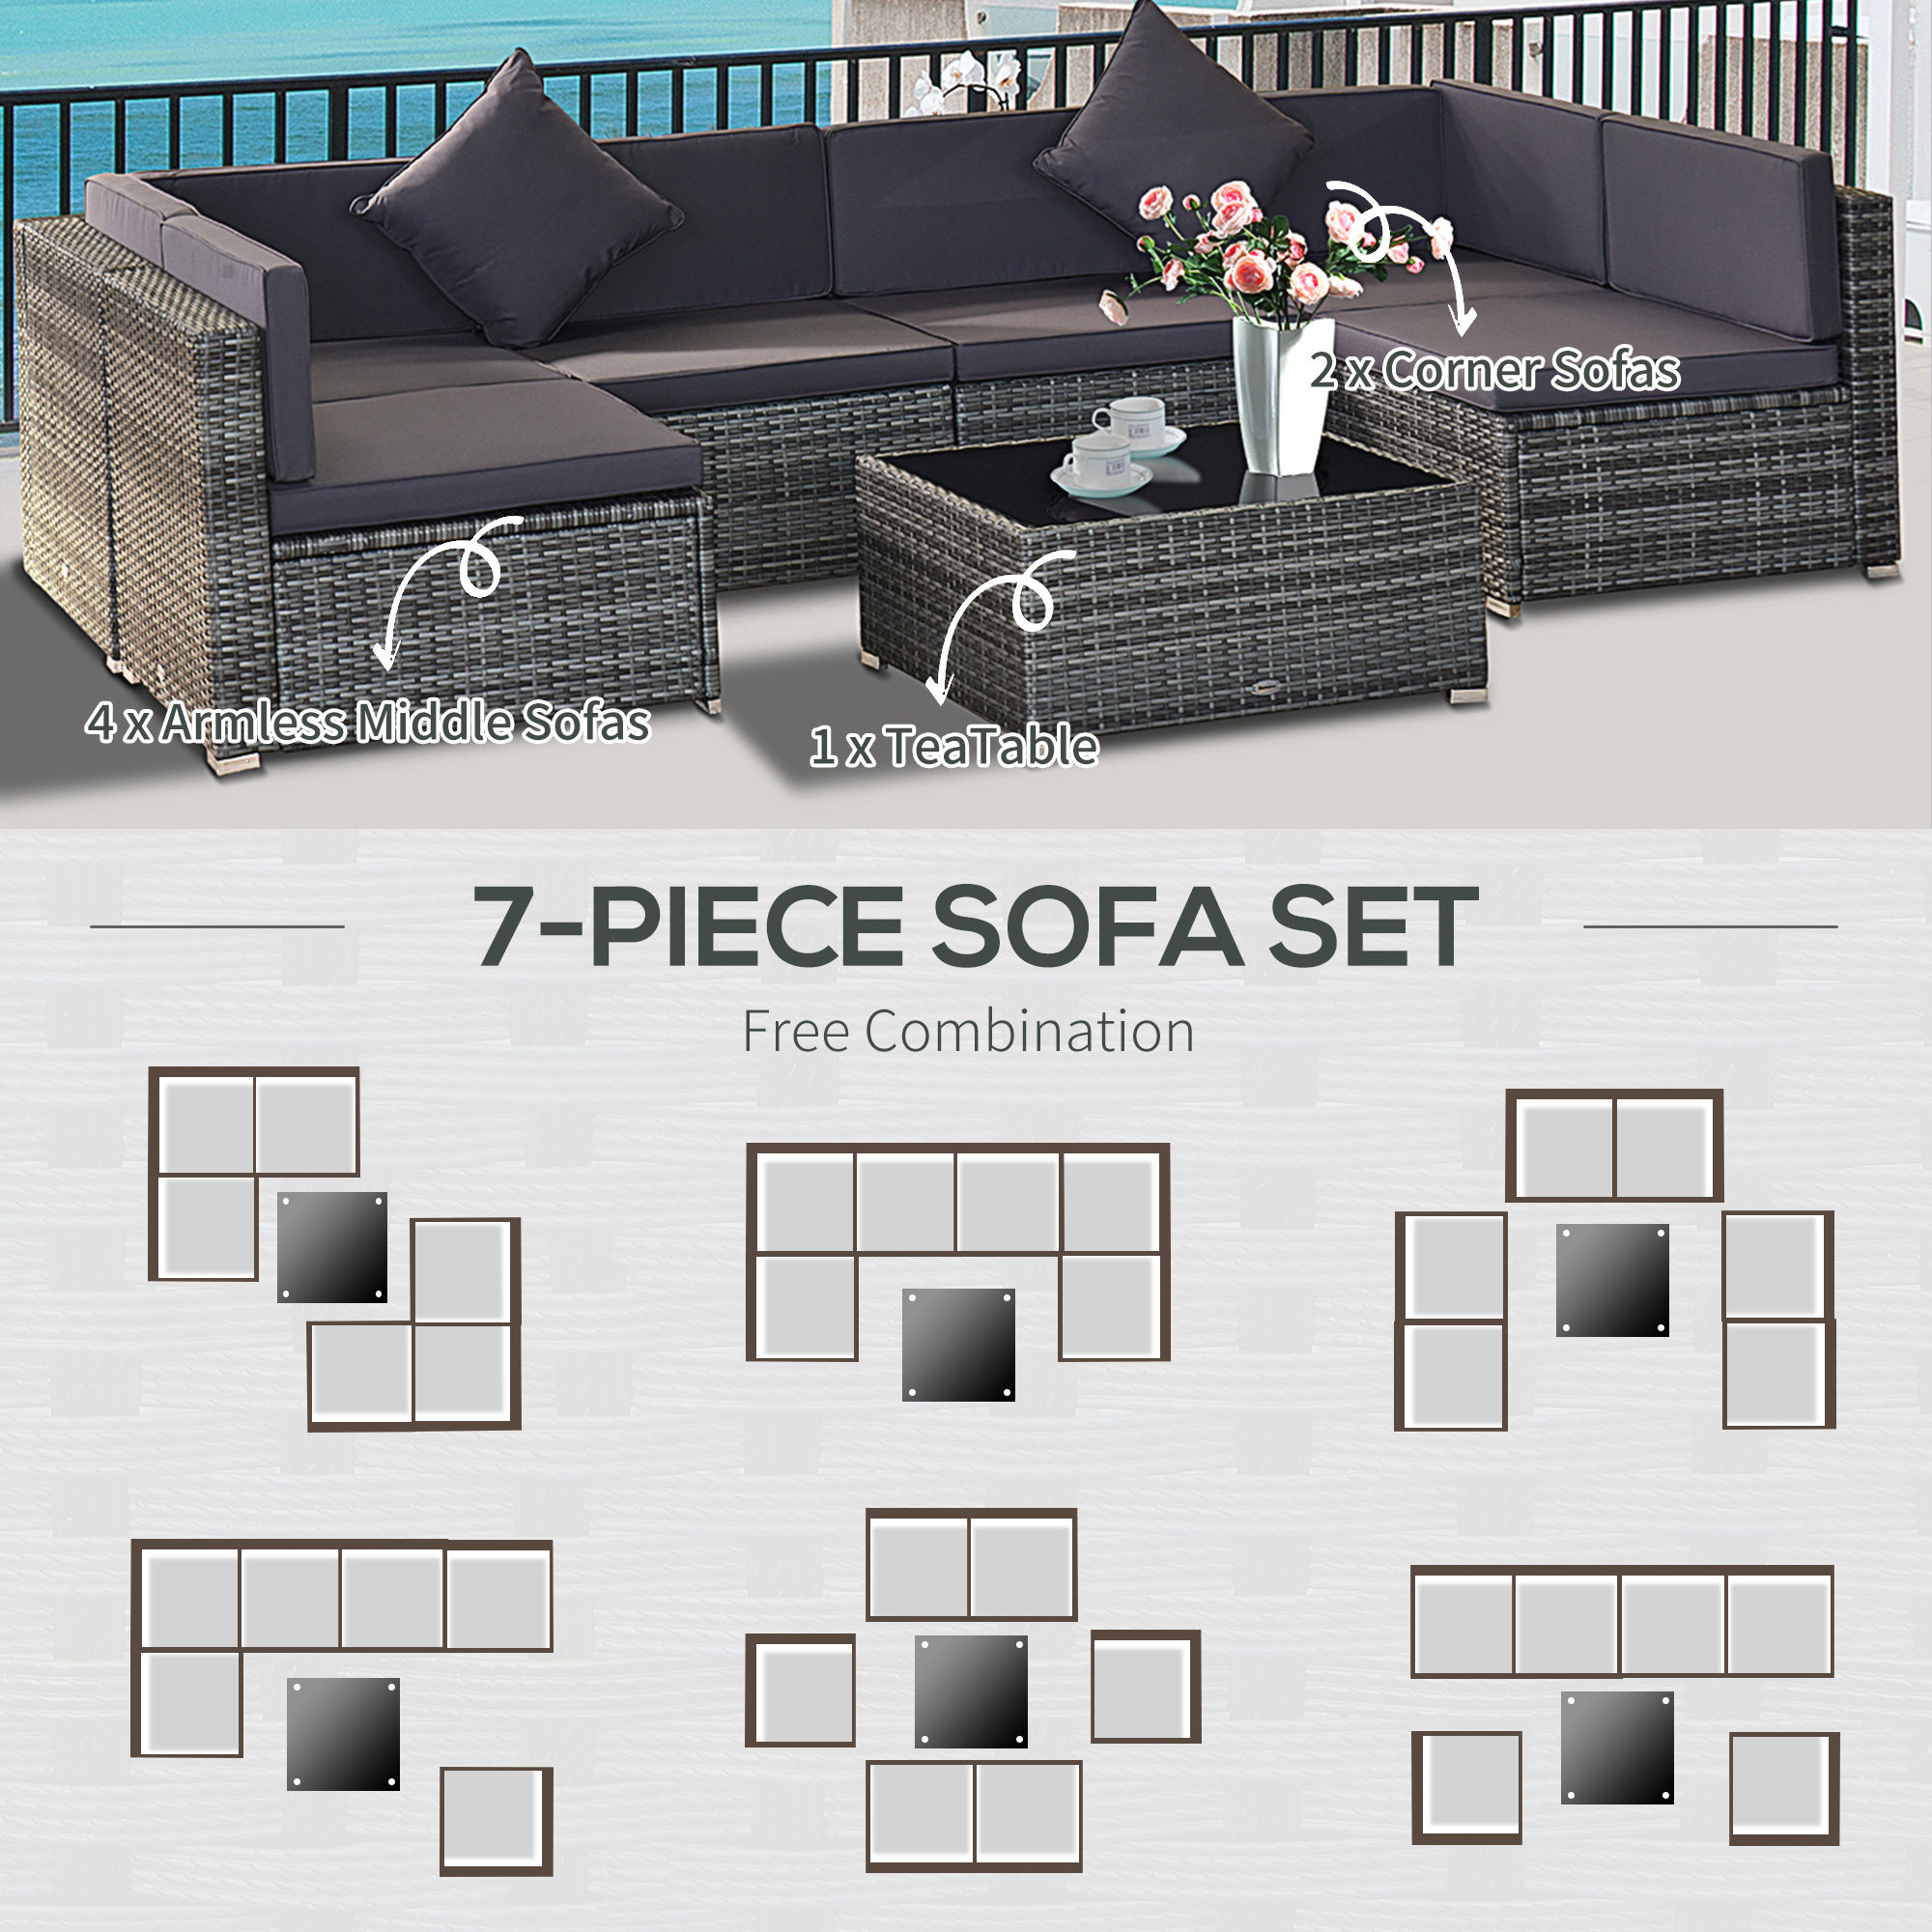 Outsunny 7-Piece Outdoor Patio Furniture Set w/ Rattan Wicker - image 5 of 9